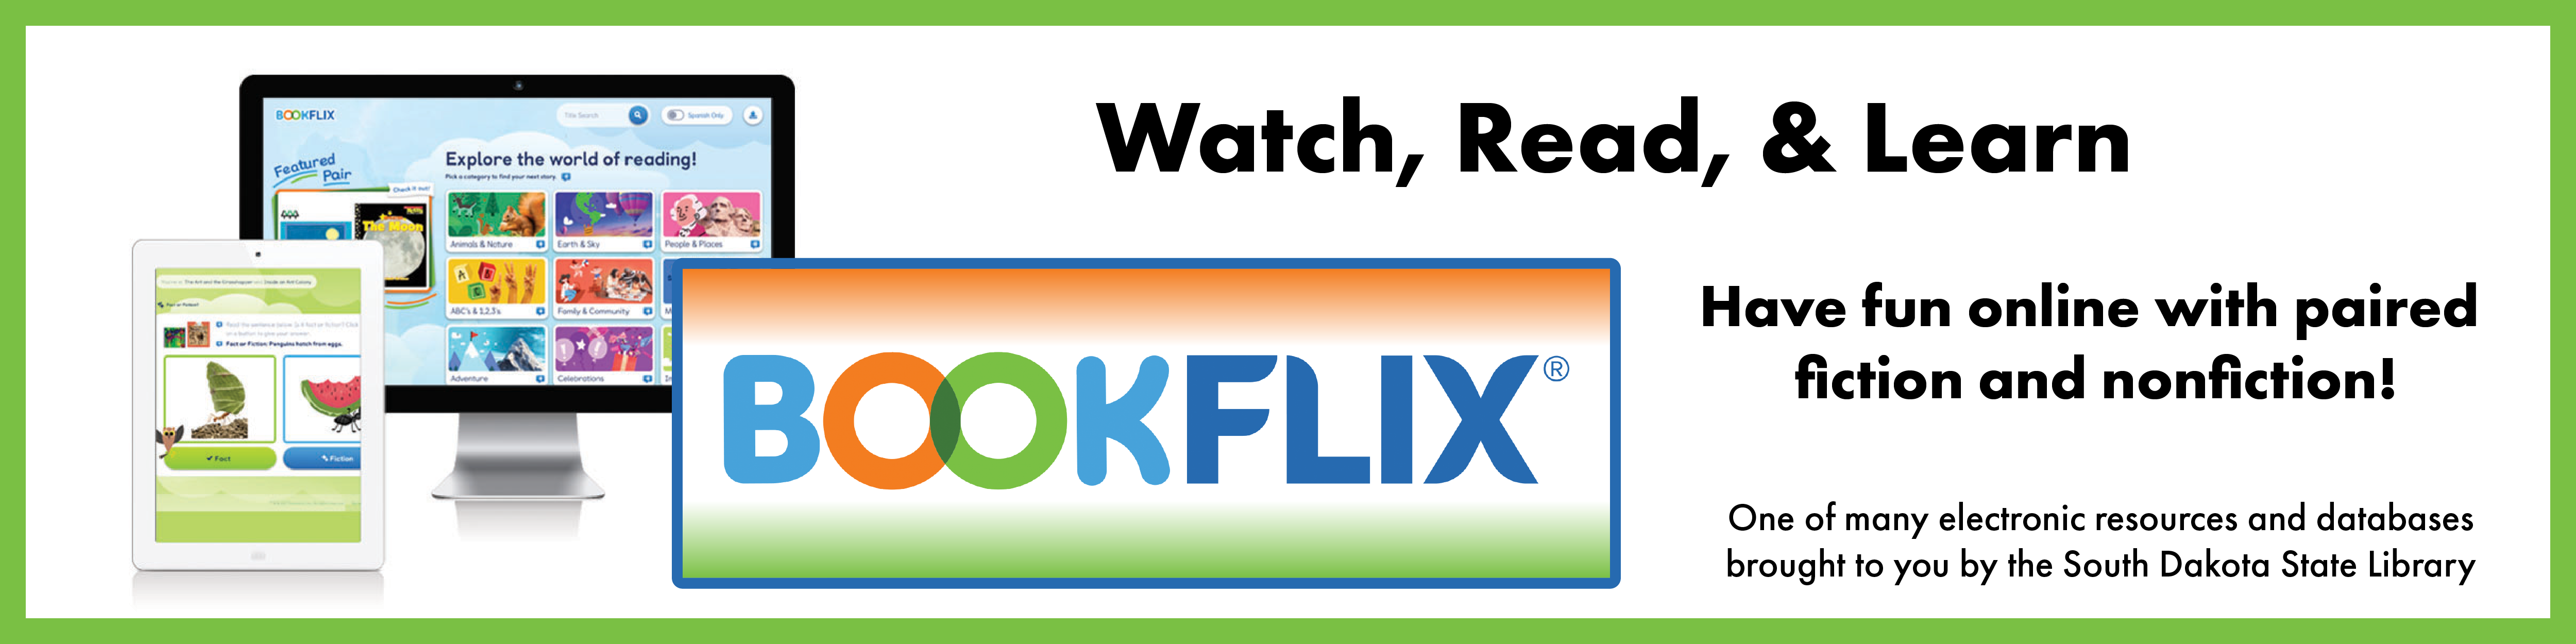 Watch Read and learn. Bookflix. Have fun online with paired fiction and non fiction. Electronic resource brought to you by the south dakota state library